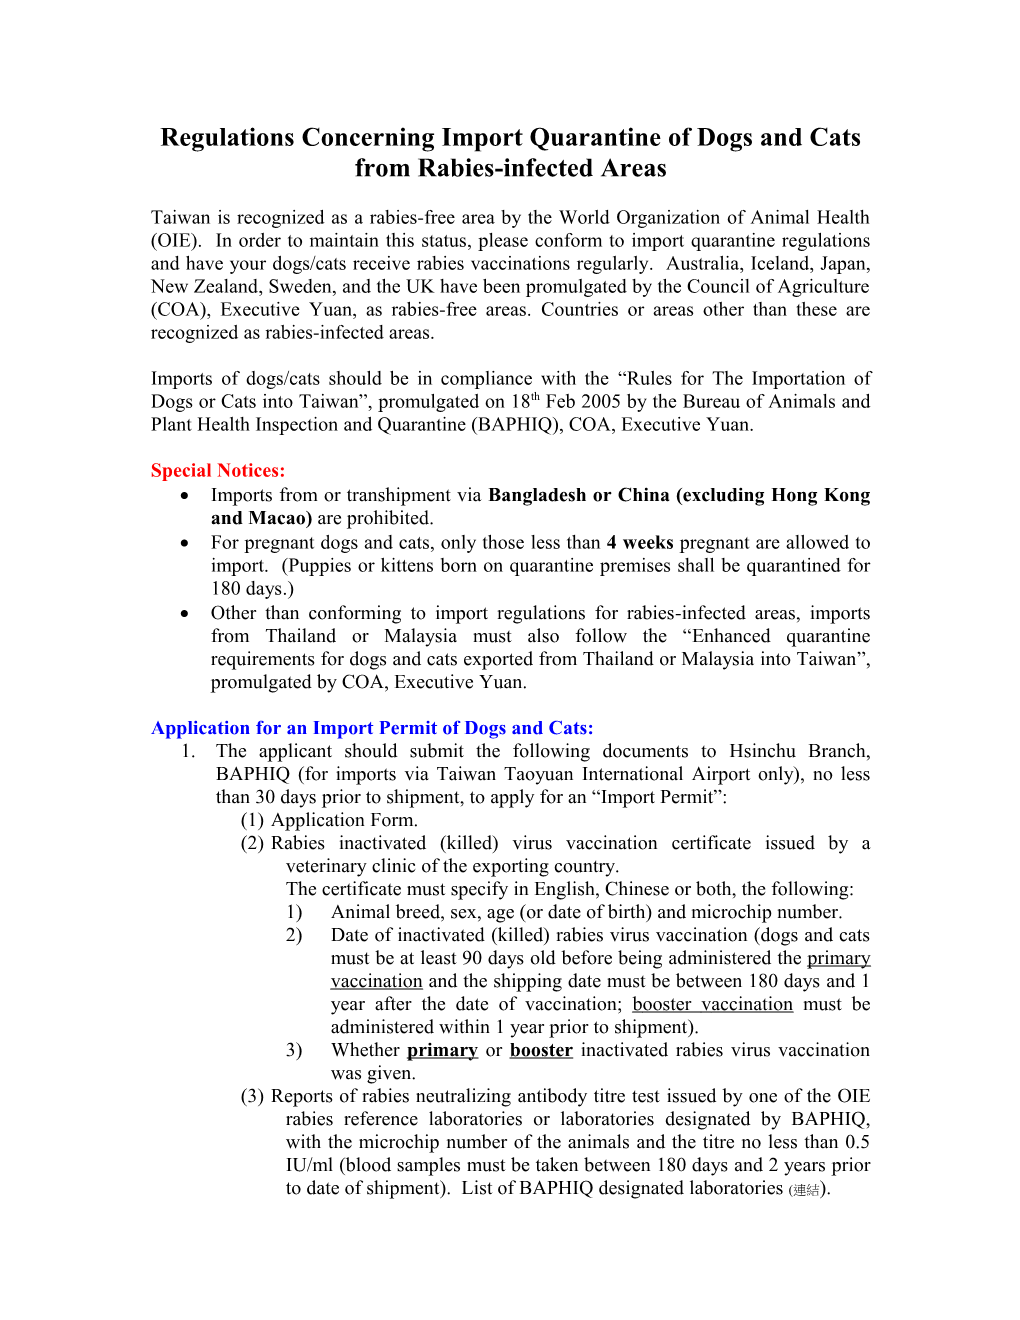 Regulations Concerning Import Quarantine of Dogs and Cats from Rabies Areas